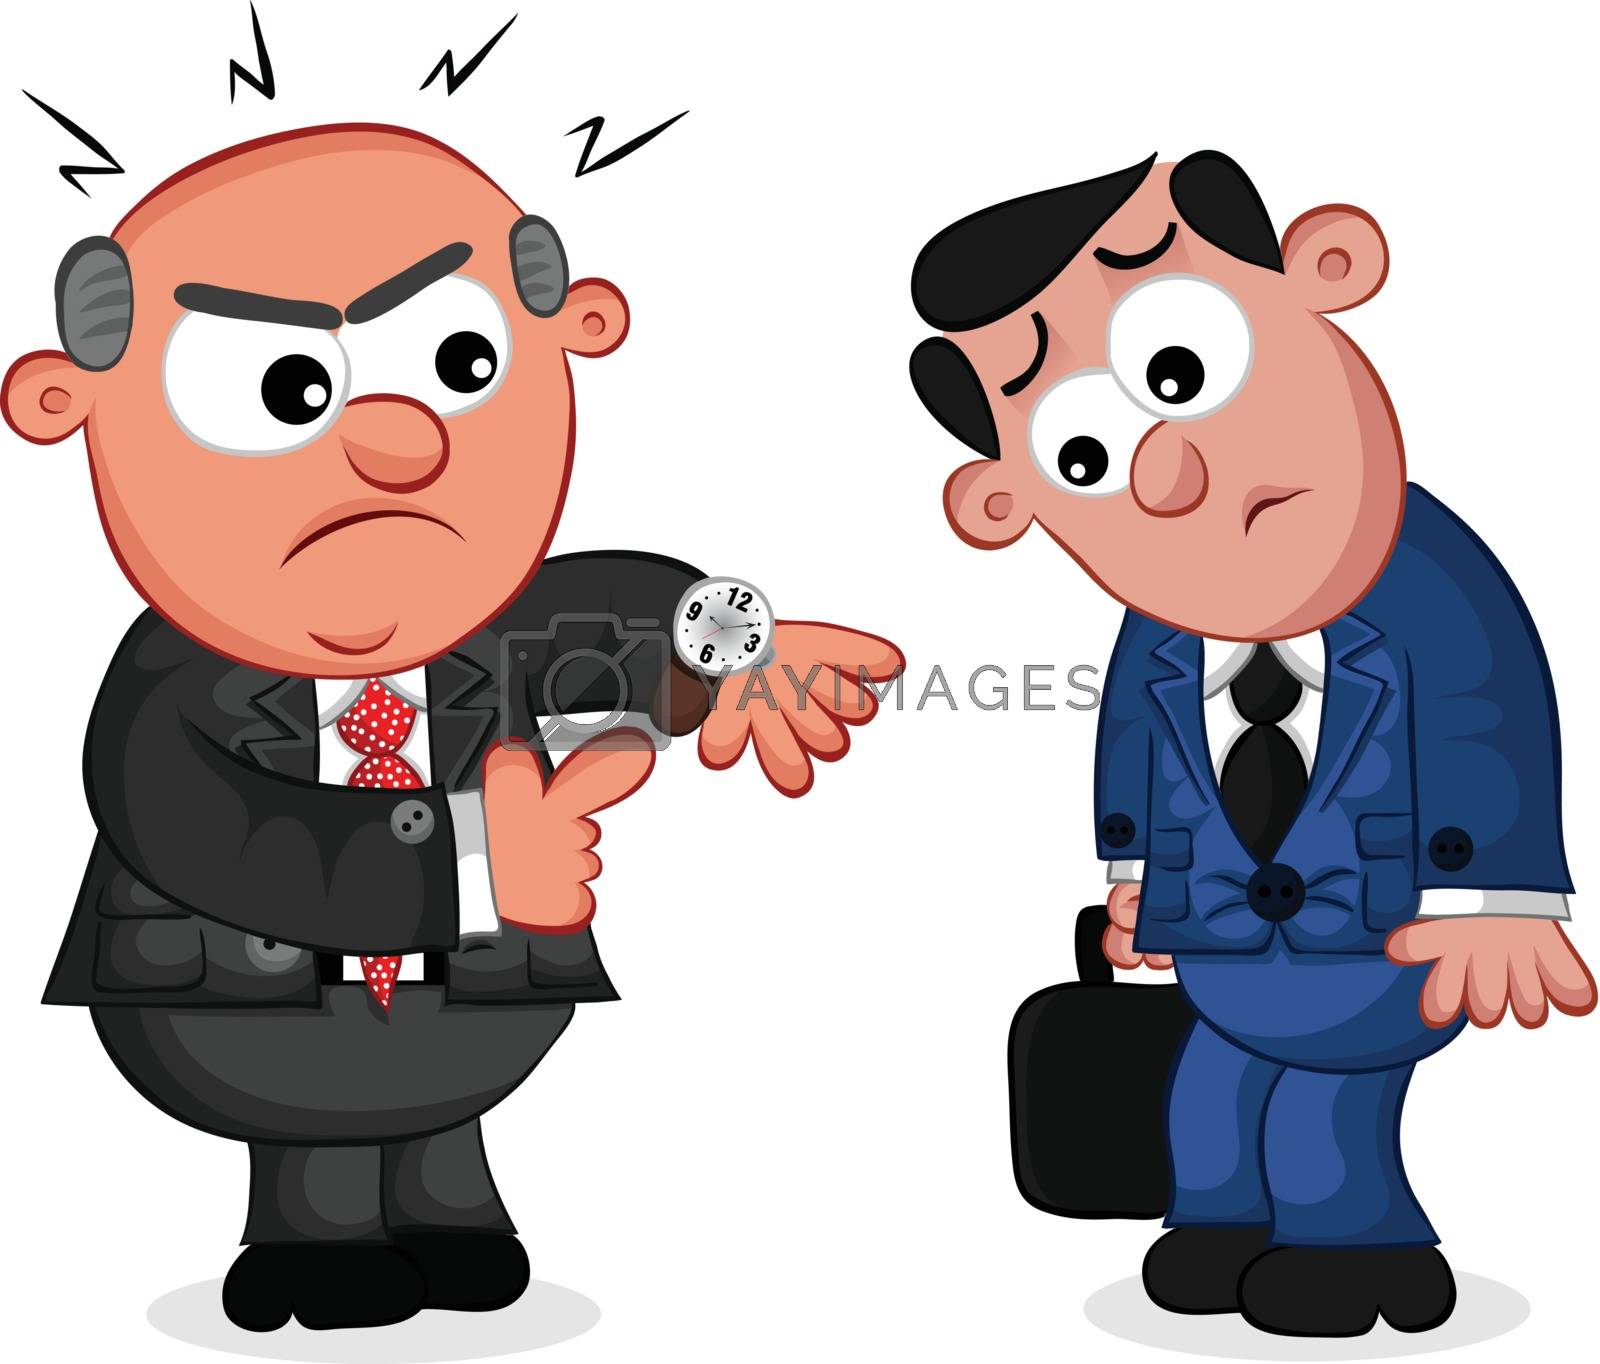 Royalty Free Vector | Business Cartoon - Boss Man Angry at Late Employee by  emrahavci